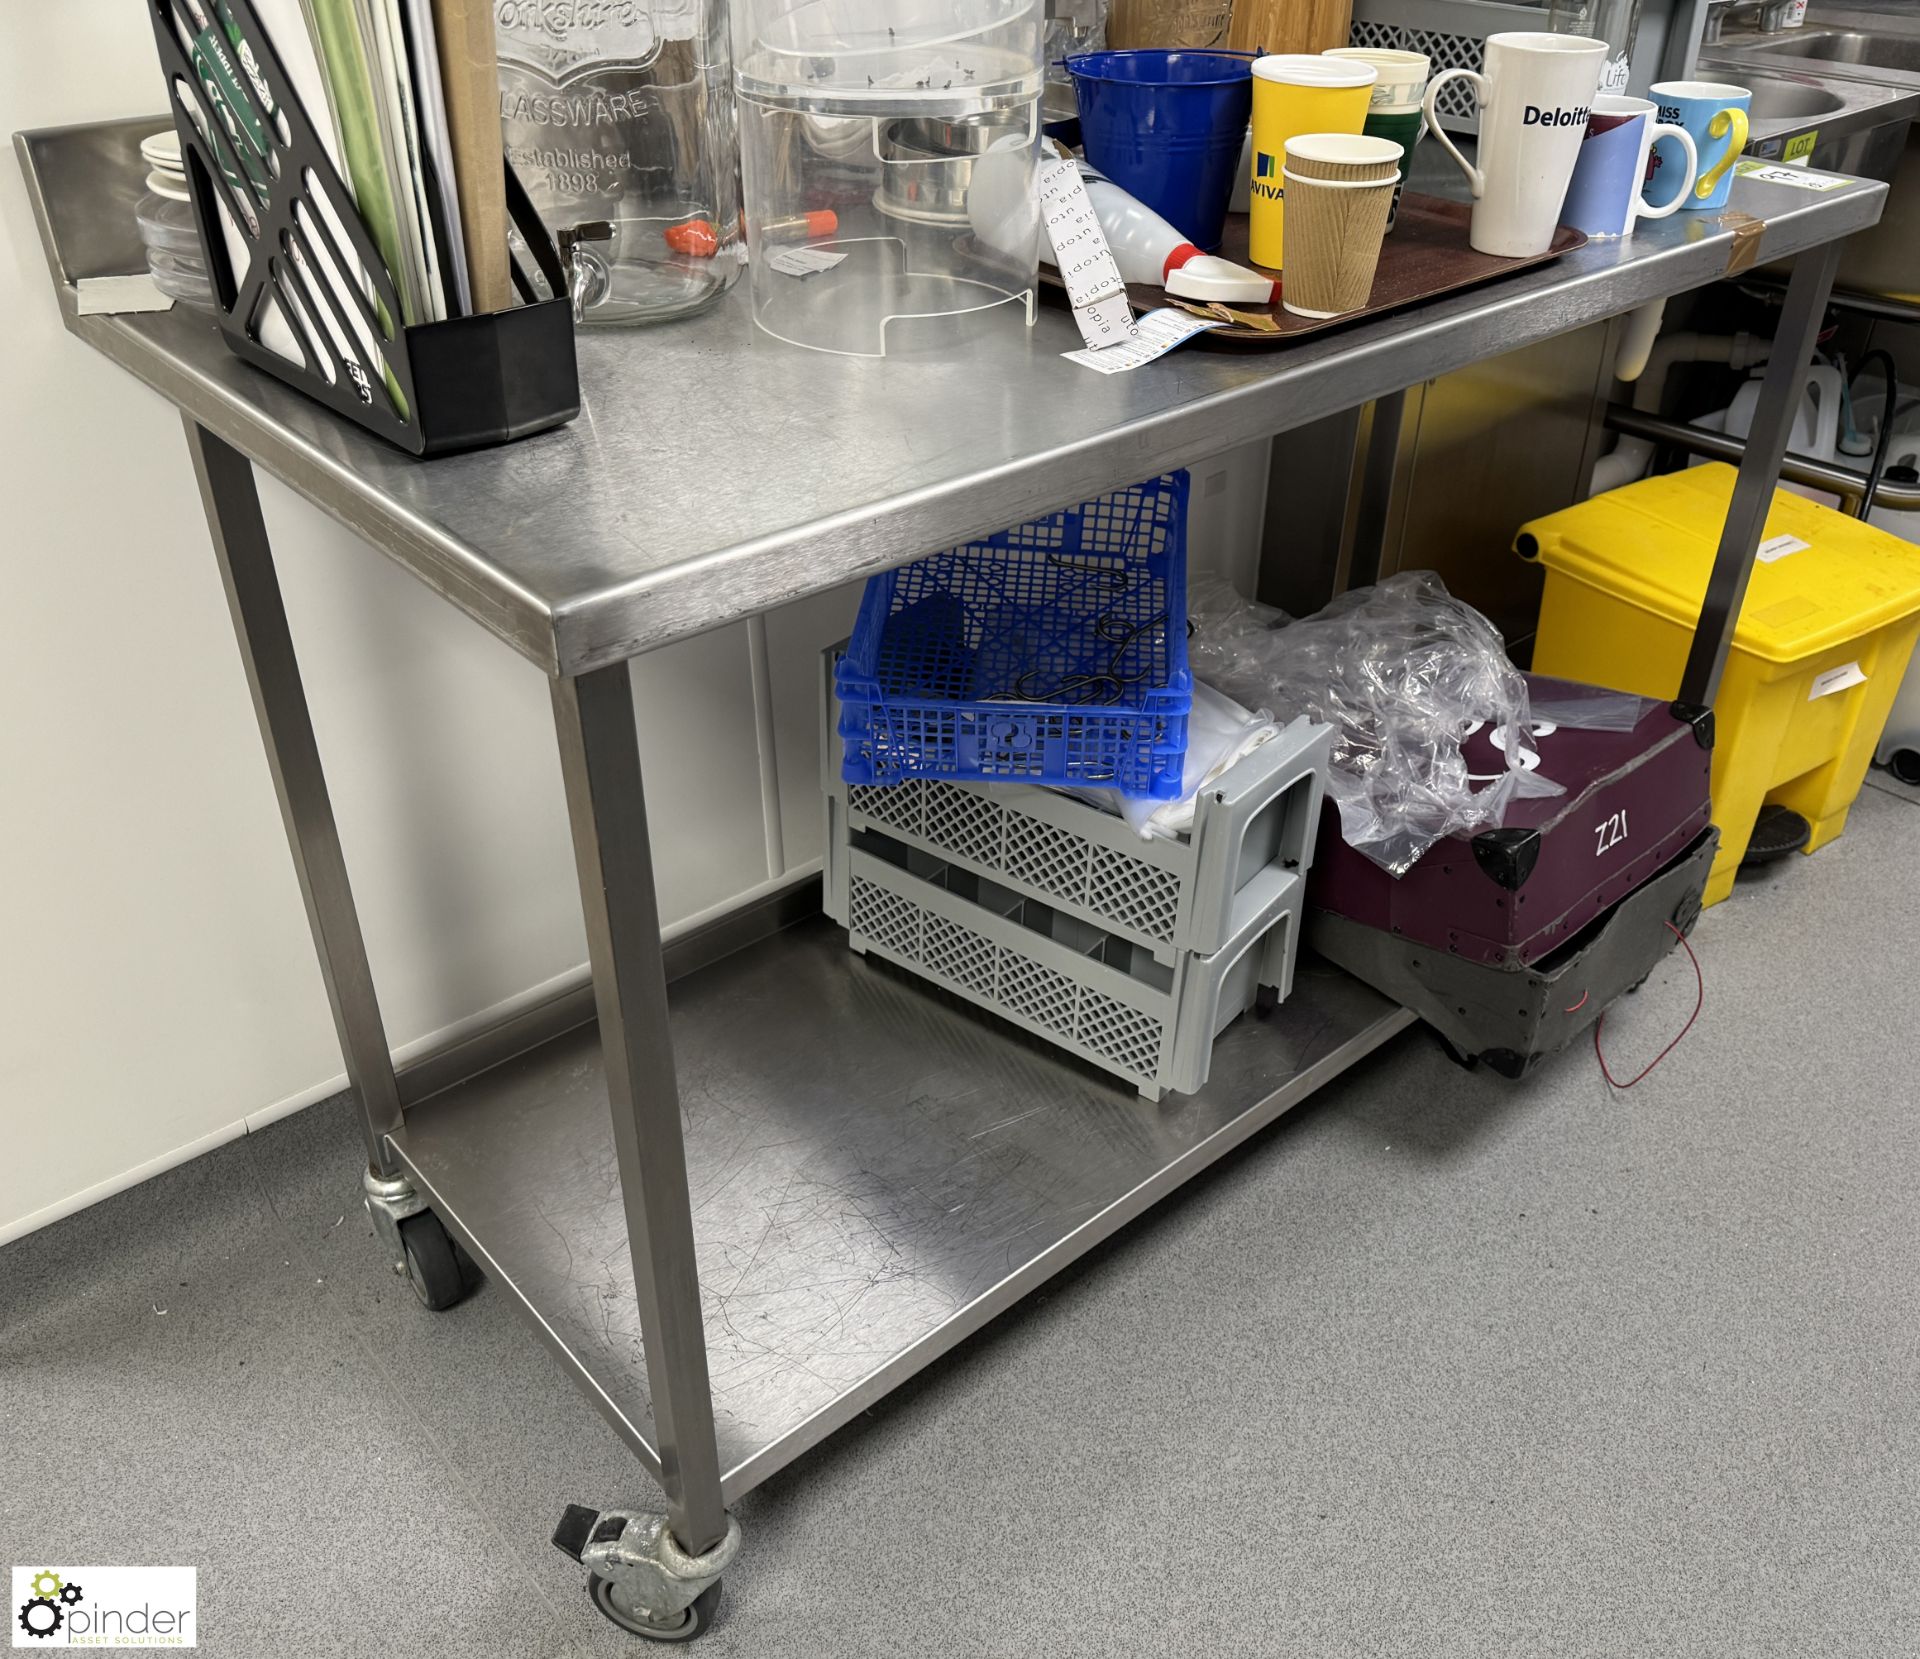 Stainless steel mobile Preparation Table, 1400mm x 700mm x 780mm (location in building – basement - Image 2 of 3